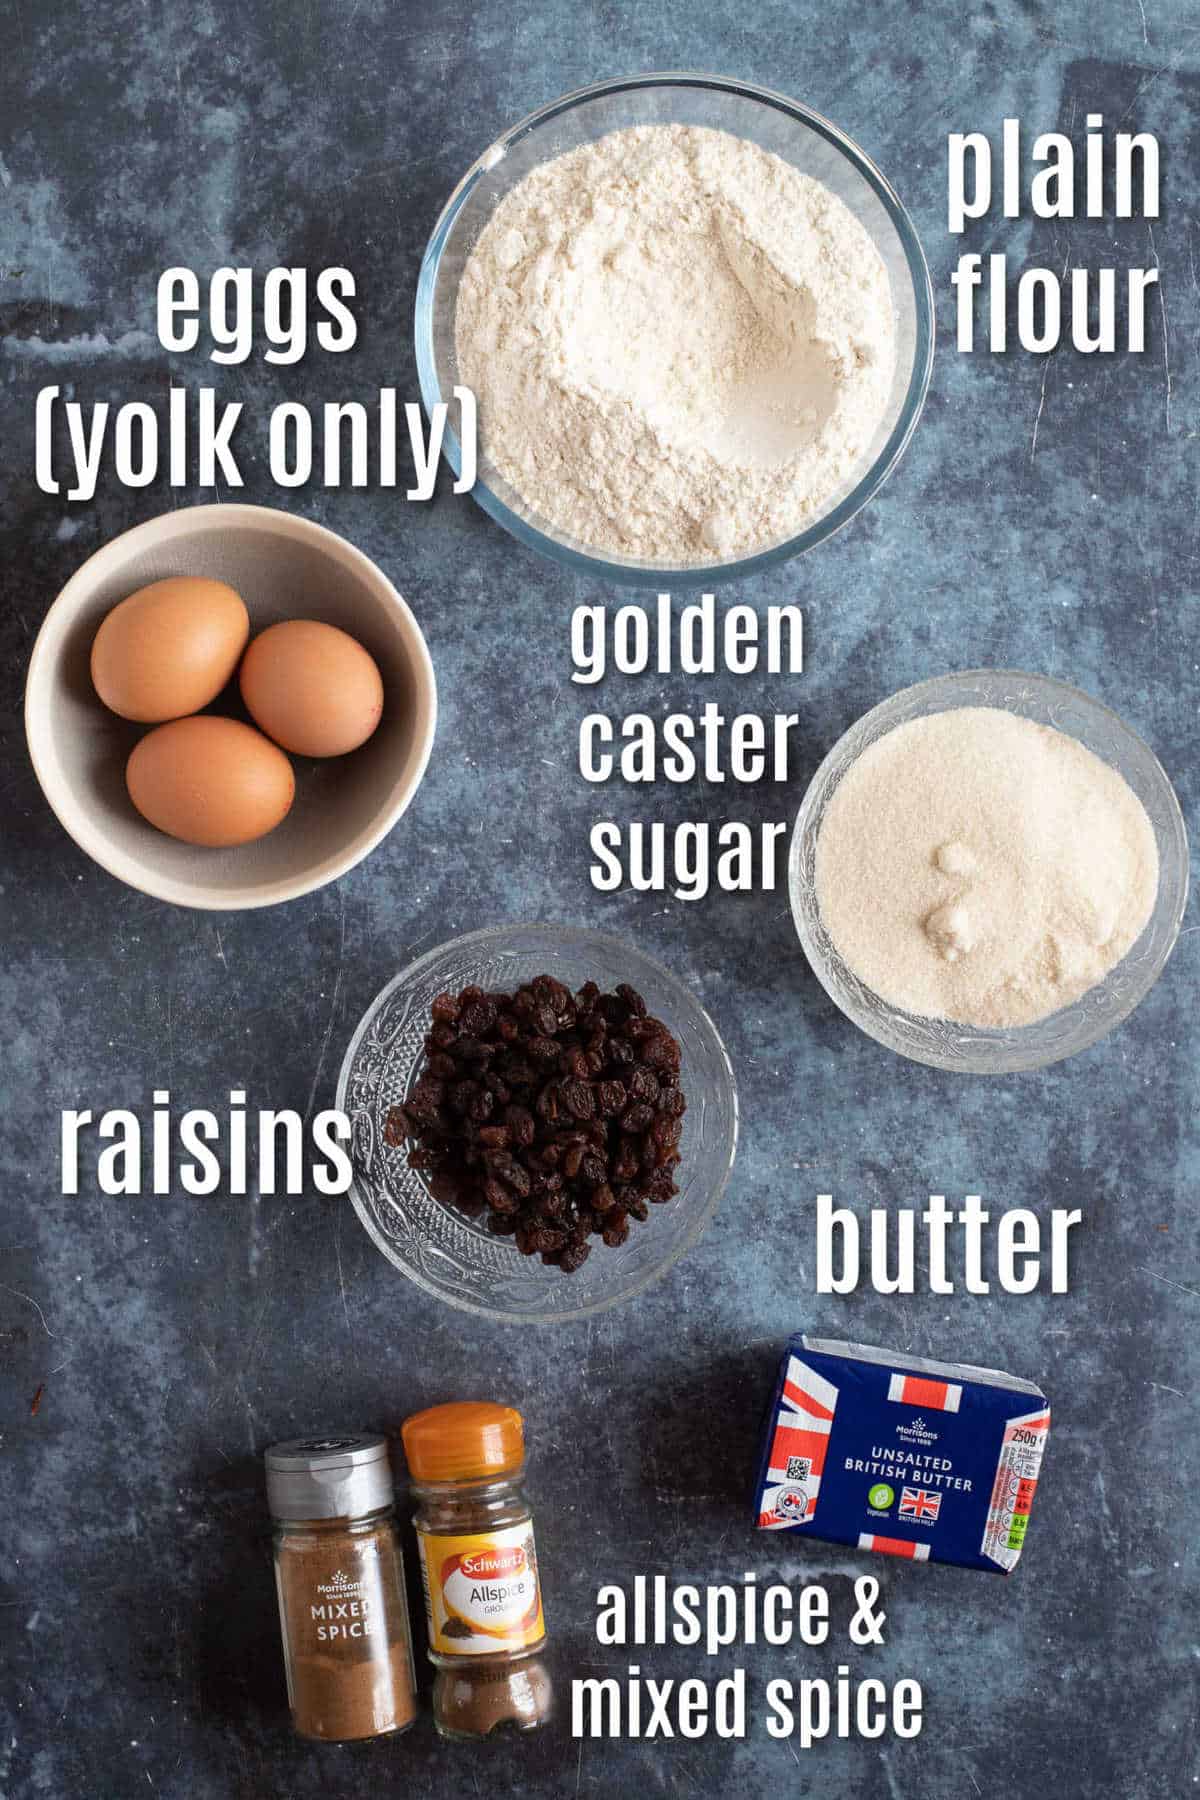 Ingredients needed to make soul cakes for All Souls' Eve